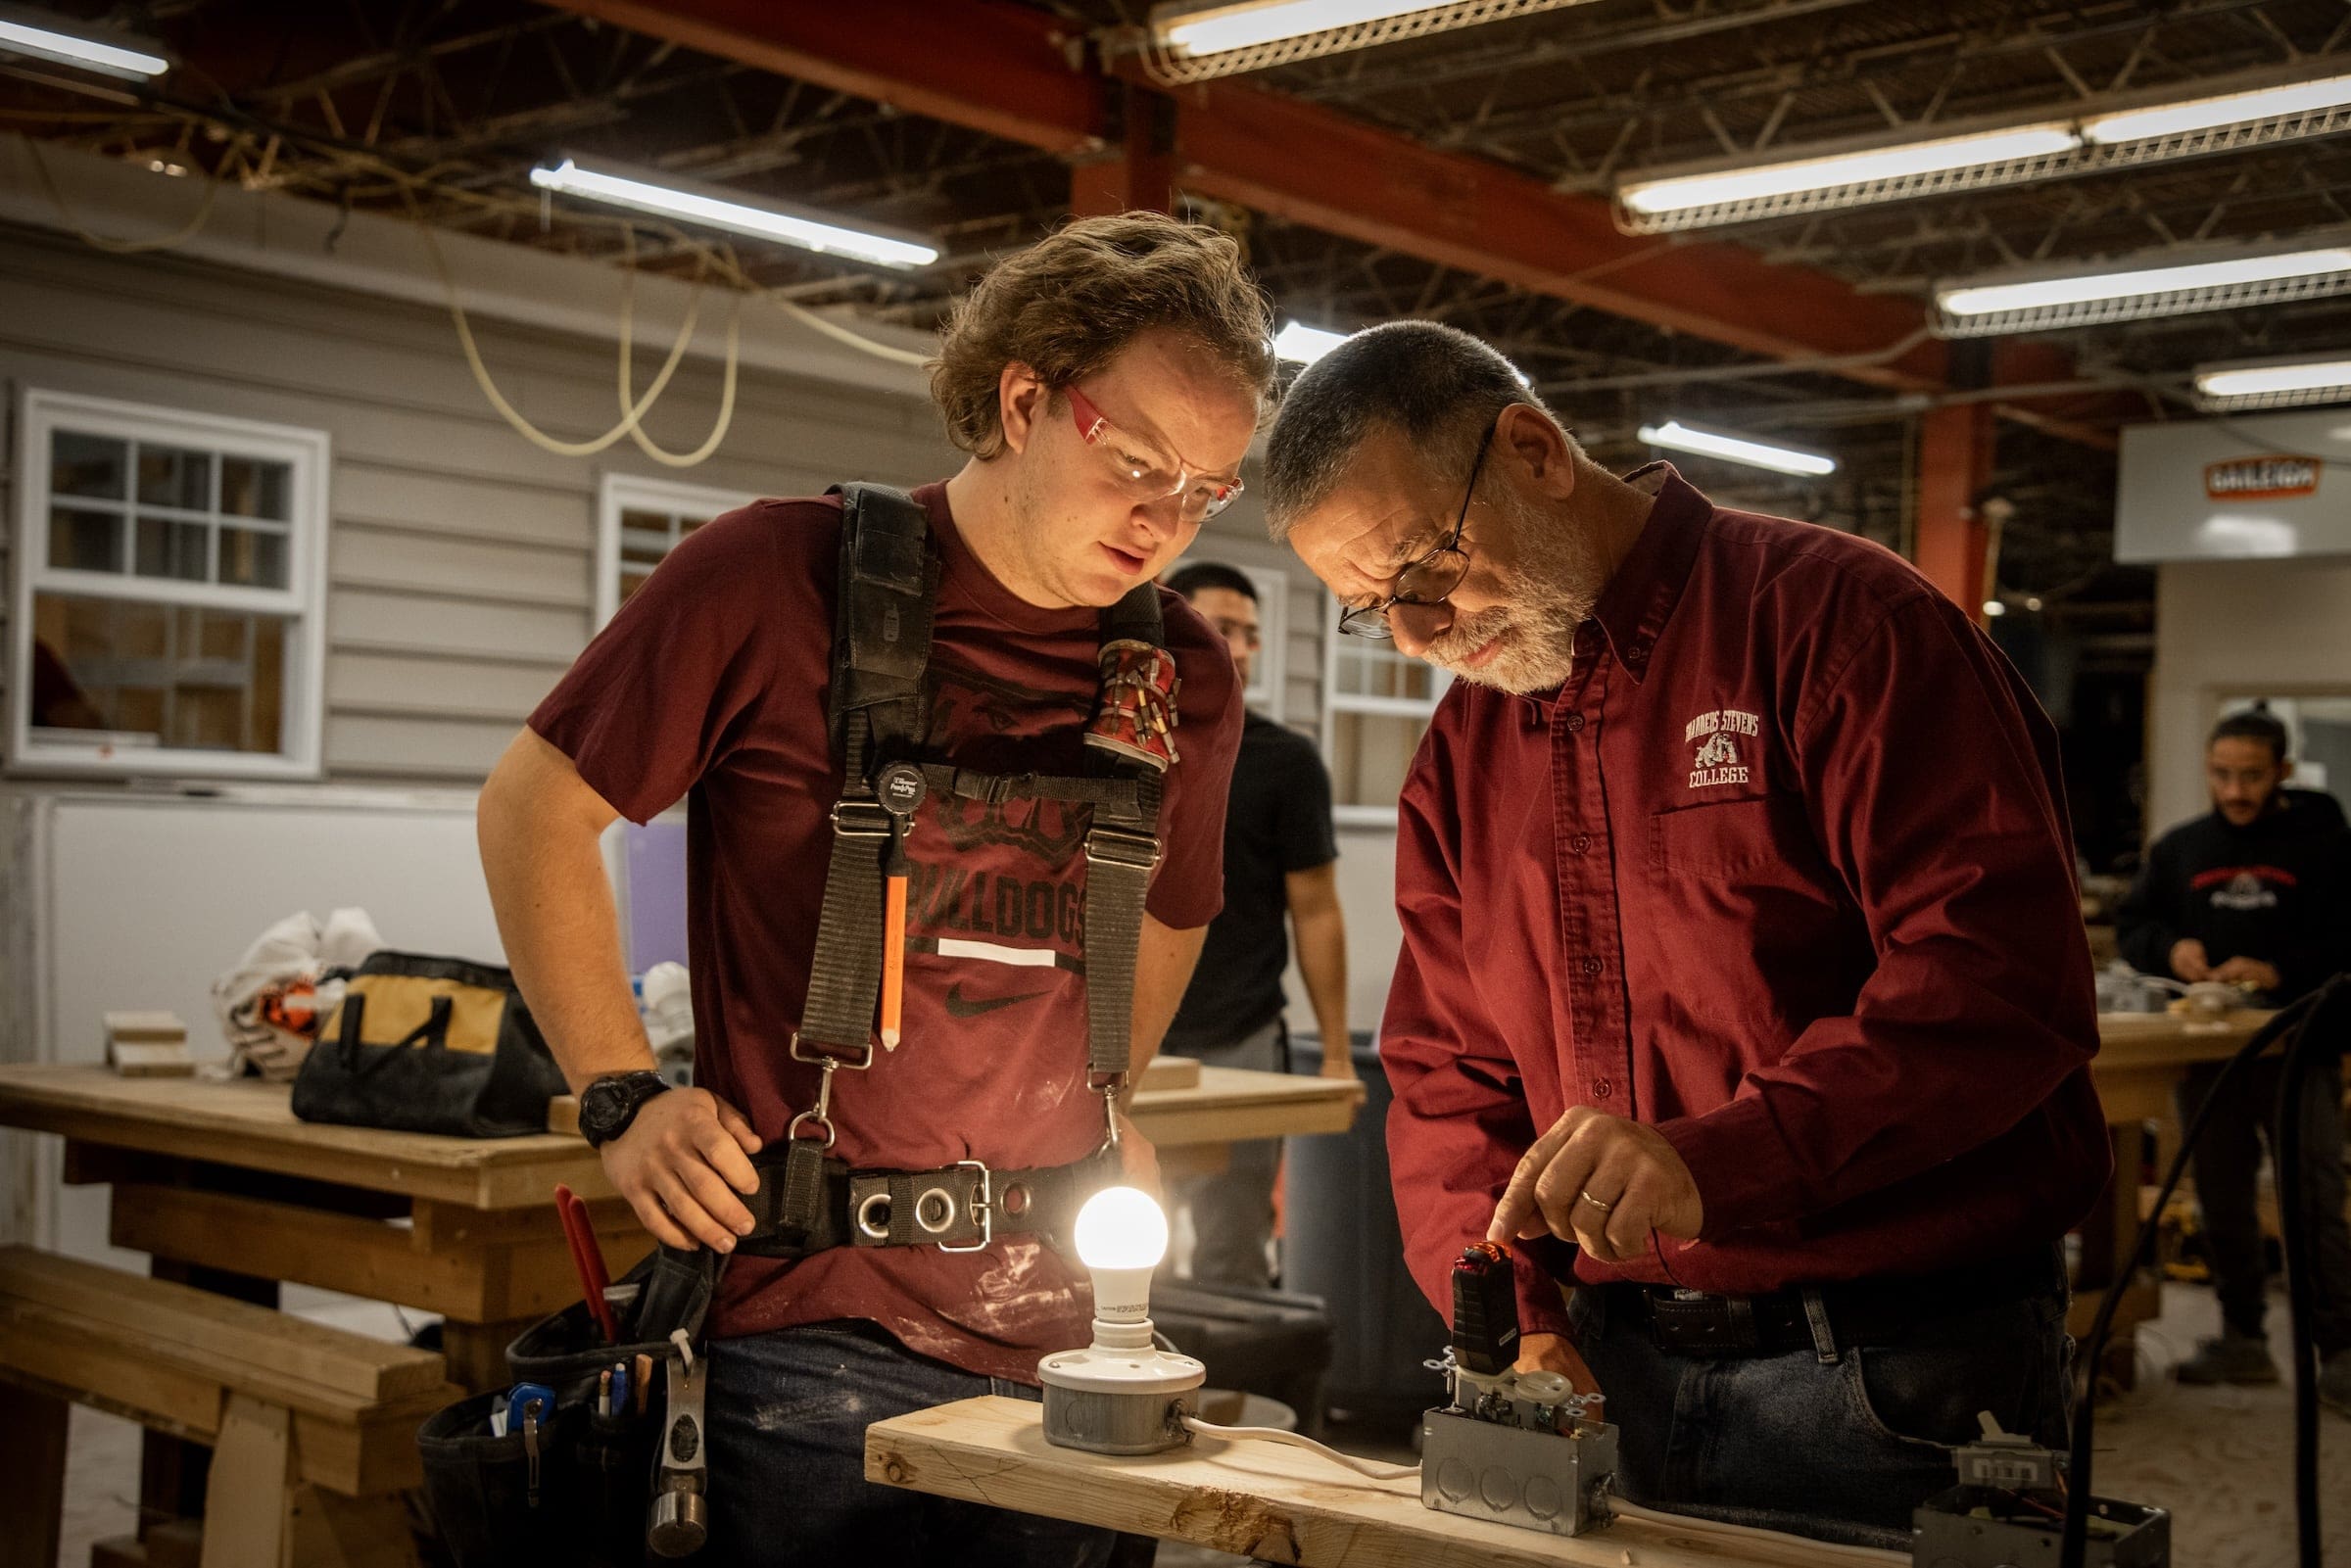 A residential remodeling instructor demonstrating electrical connections to a student.